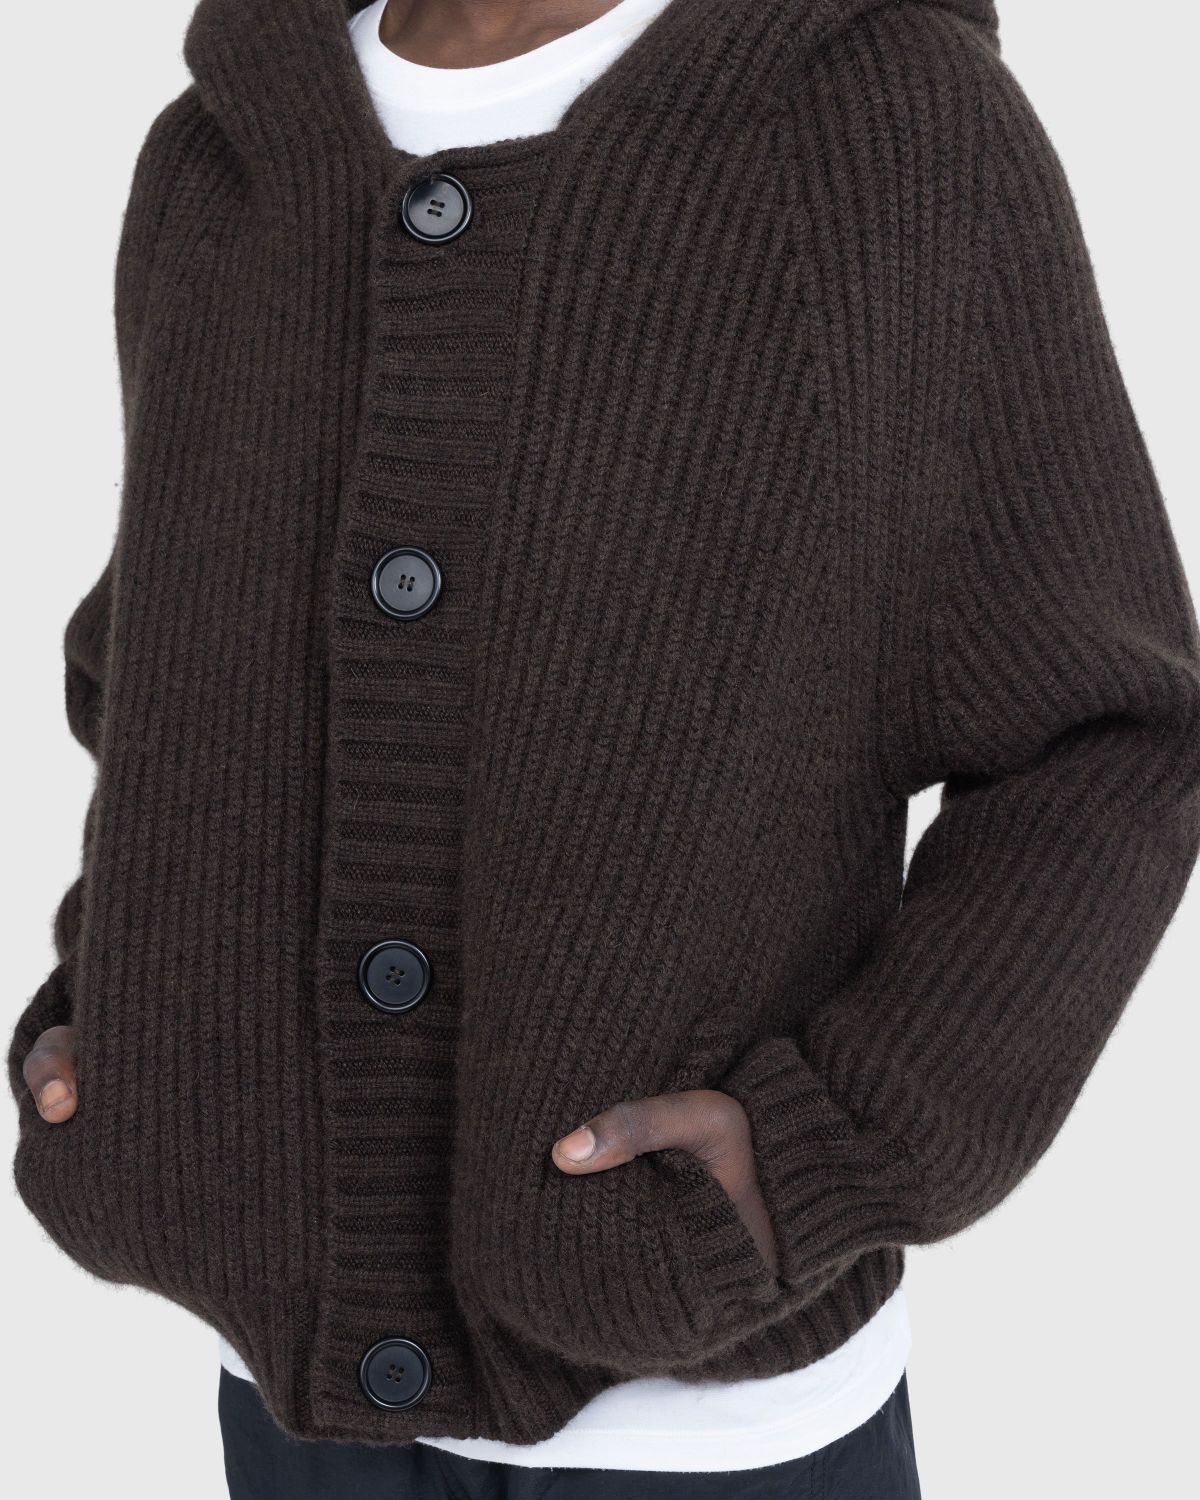 Meta Campania Collective – Michel Exaggerated Rib Cashmere Hooded Cardigan Dark Chocolate Brown - Knitwear - Brown - Image 5